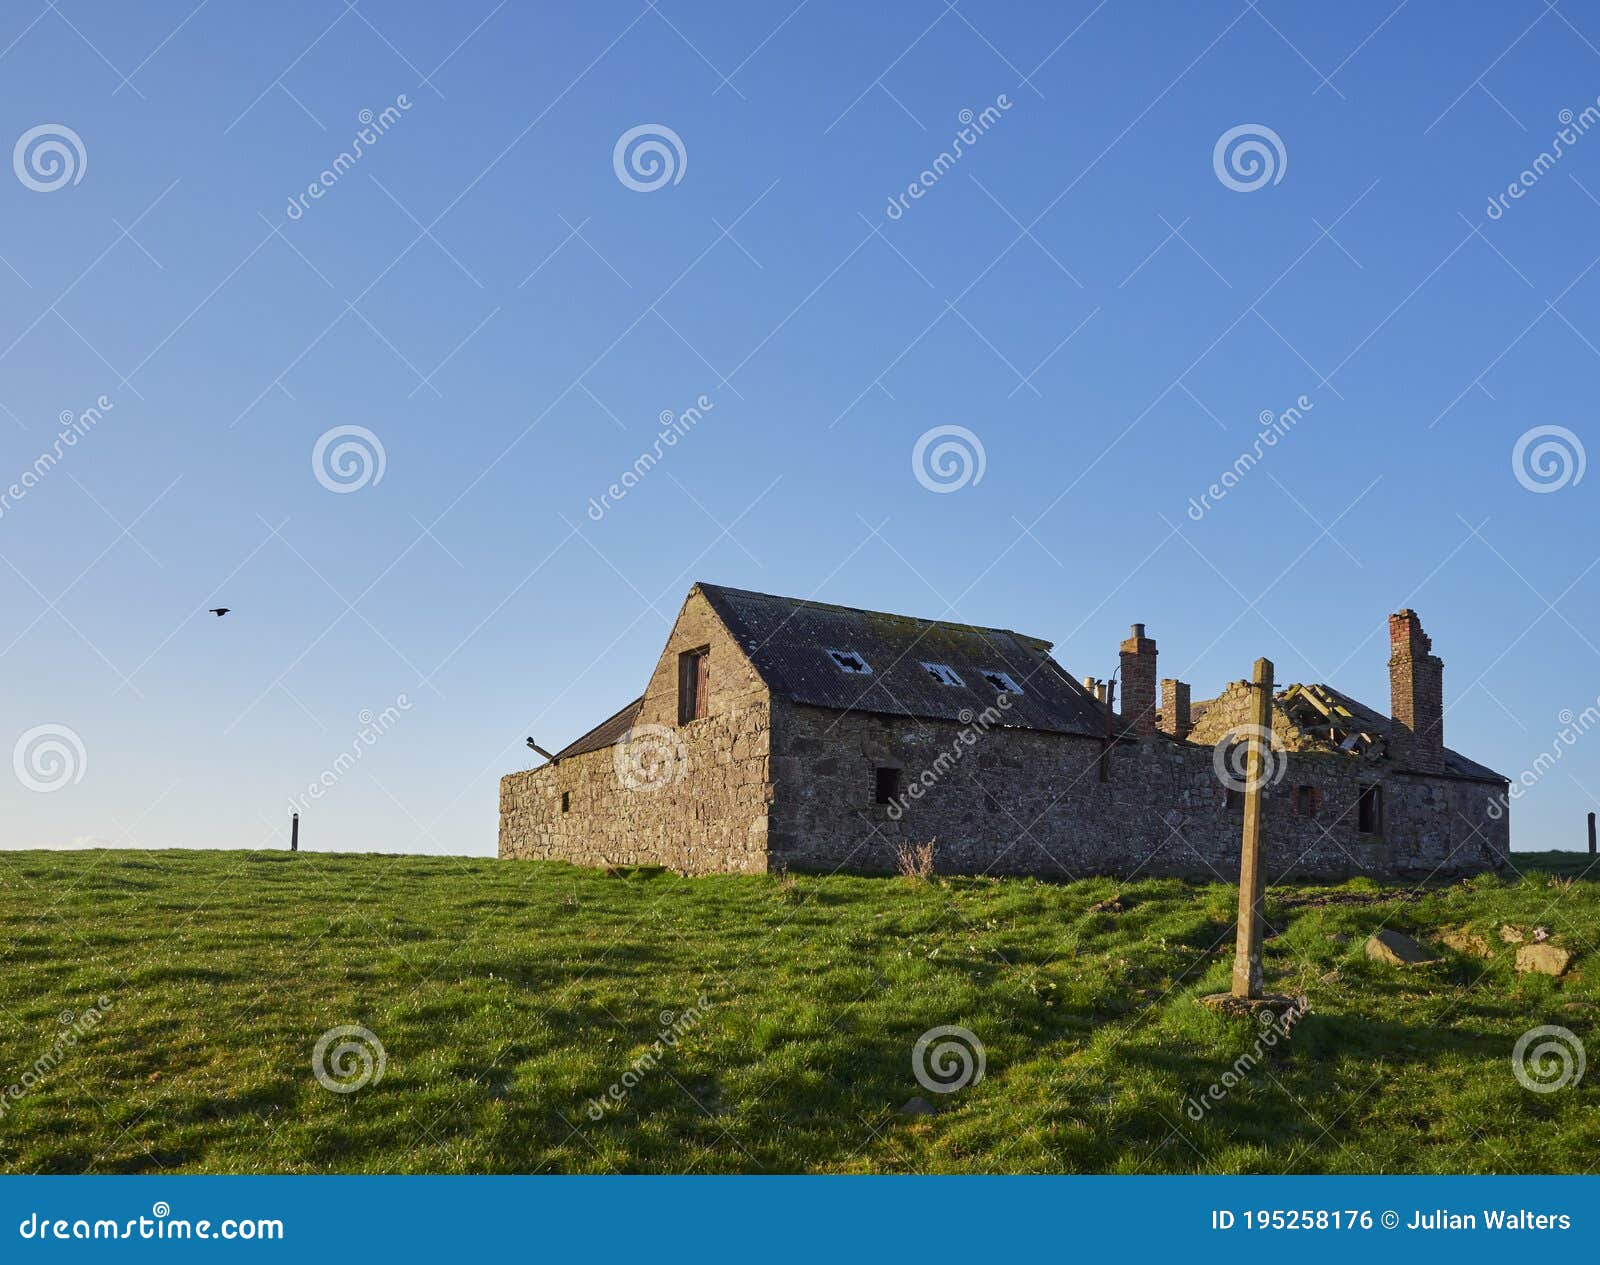 ruined and abandoned farm buildings near to the scottish coast at usan, with its roof collapsed in.